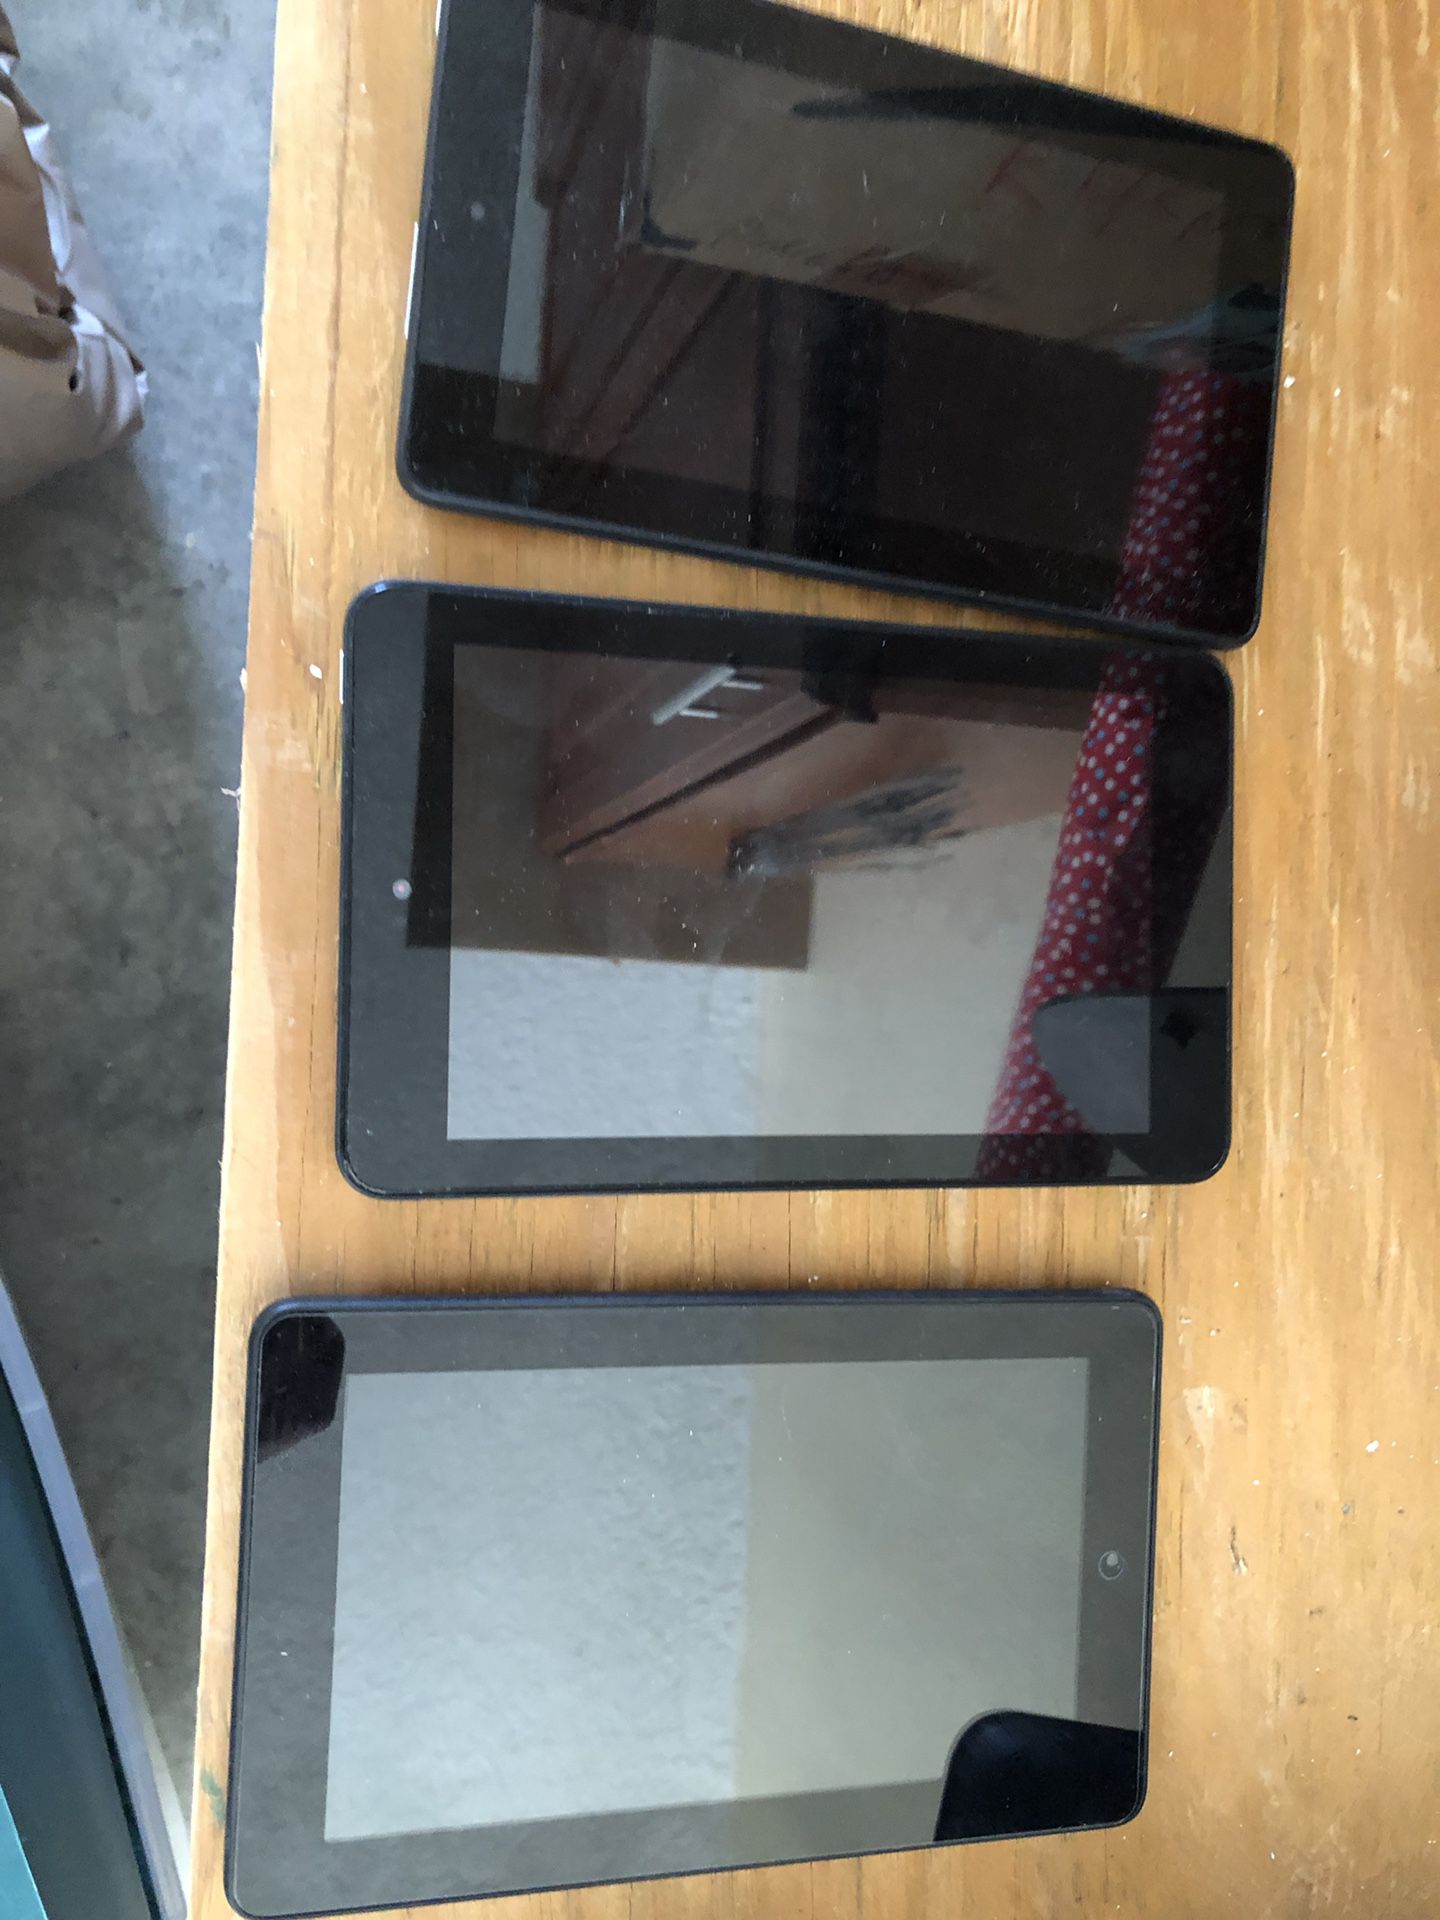 Laptop and three kindles